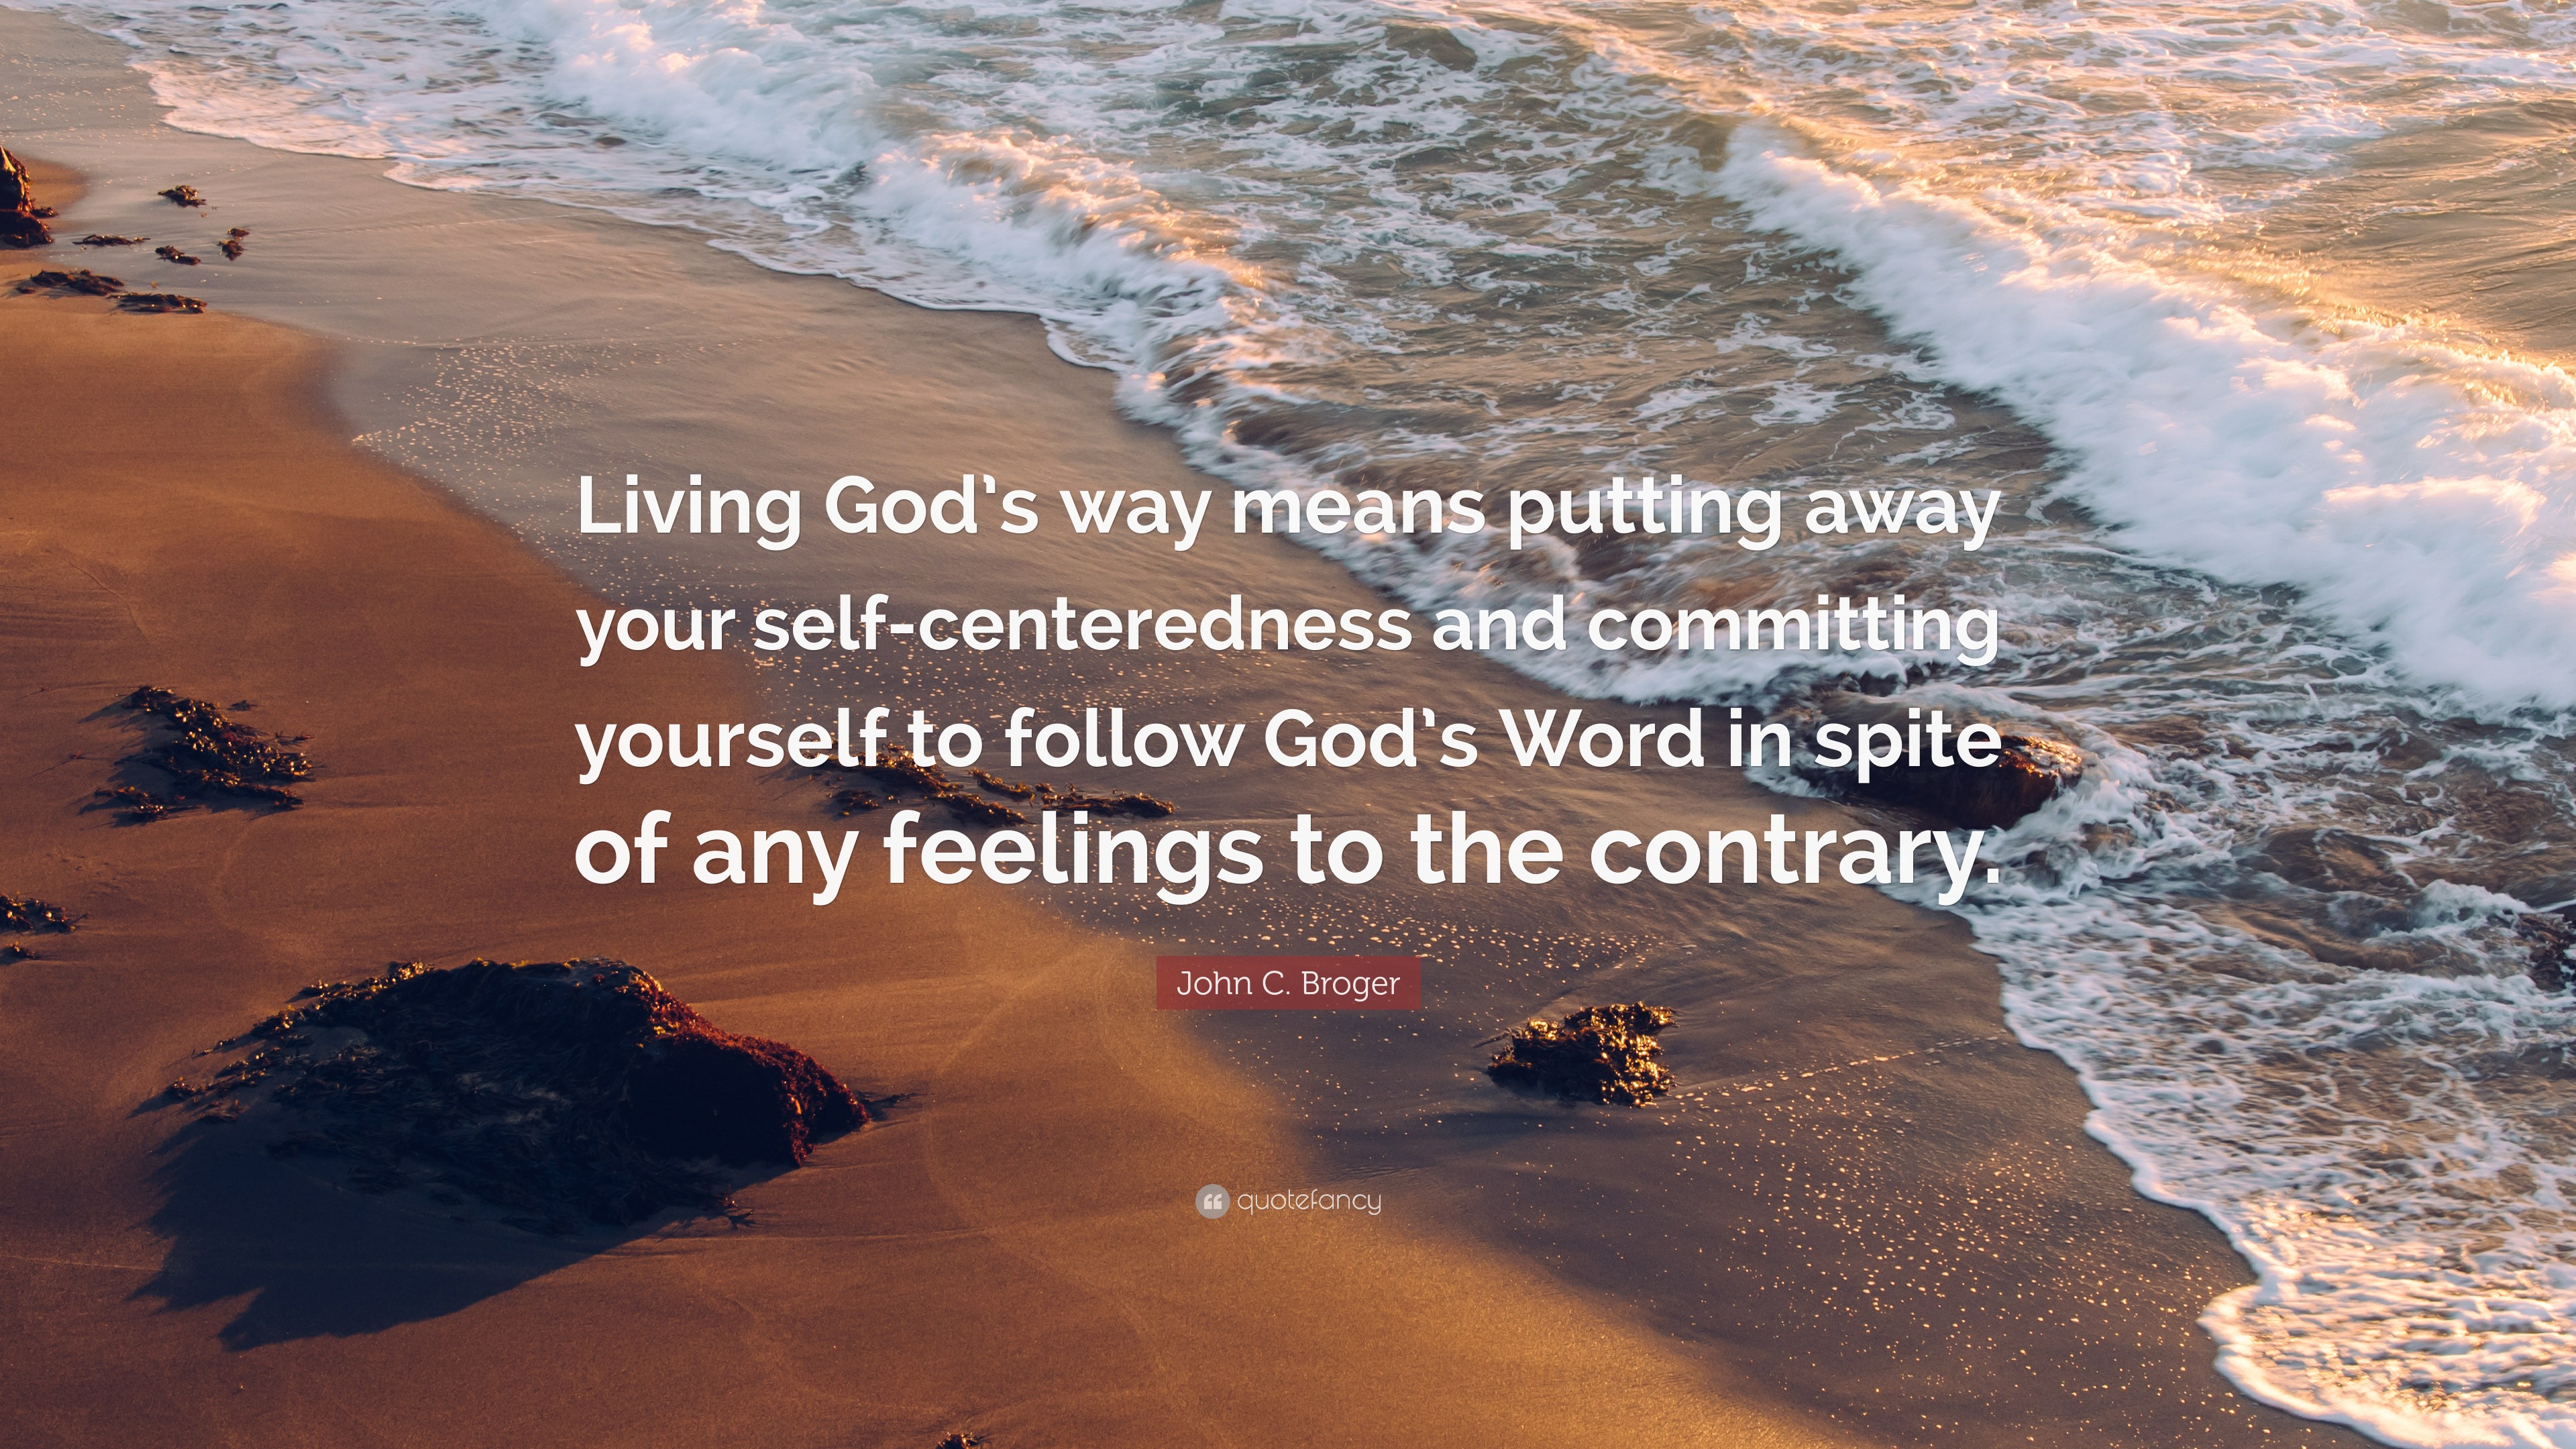 John C. Broger Quote: “Living God’s way means putting away your self